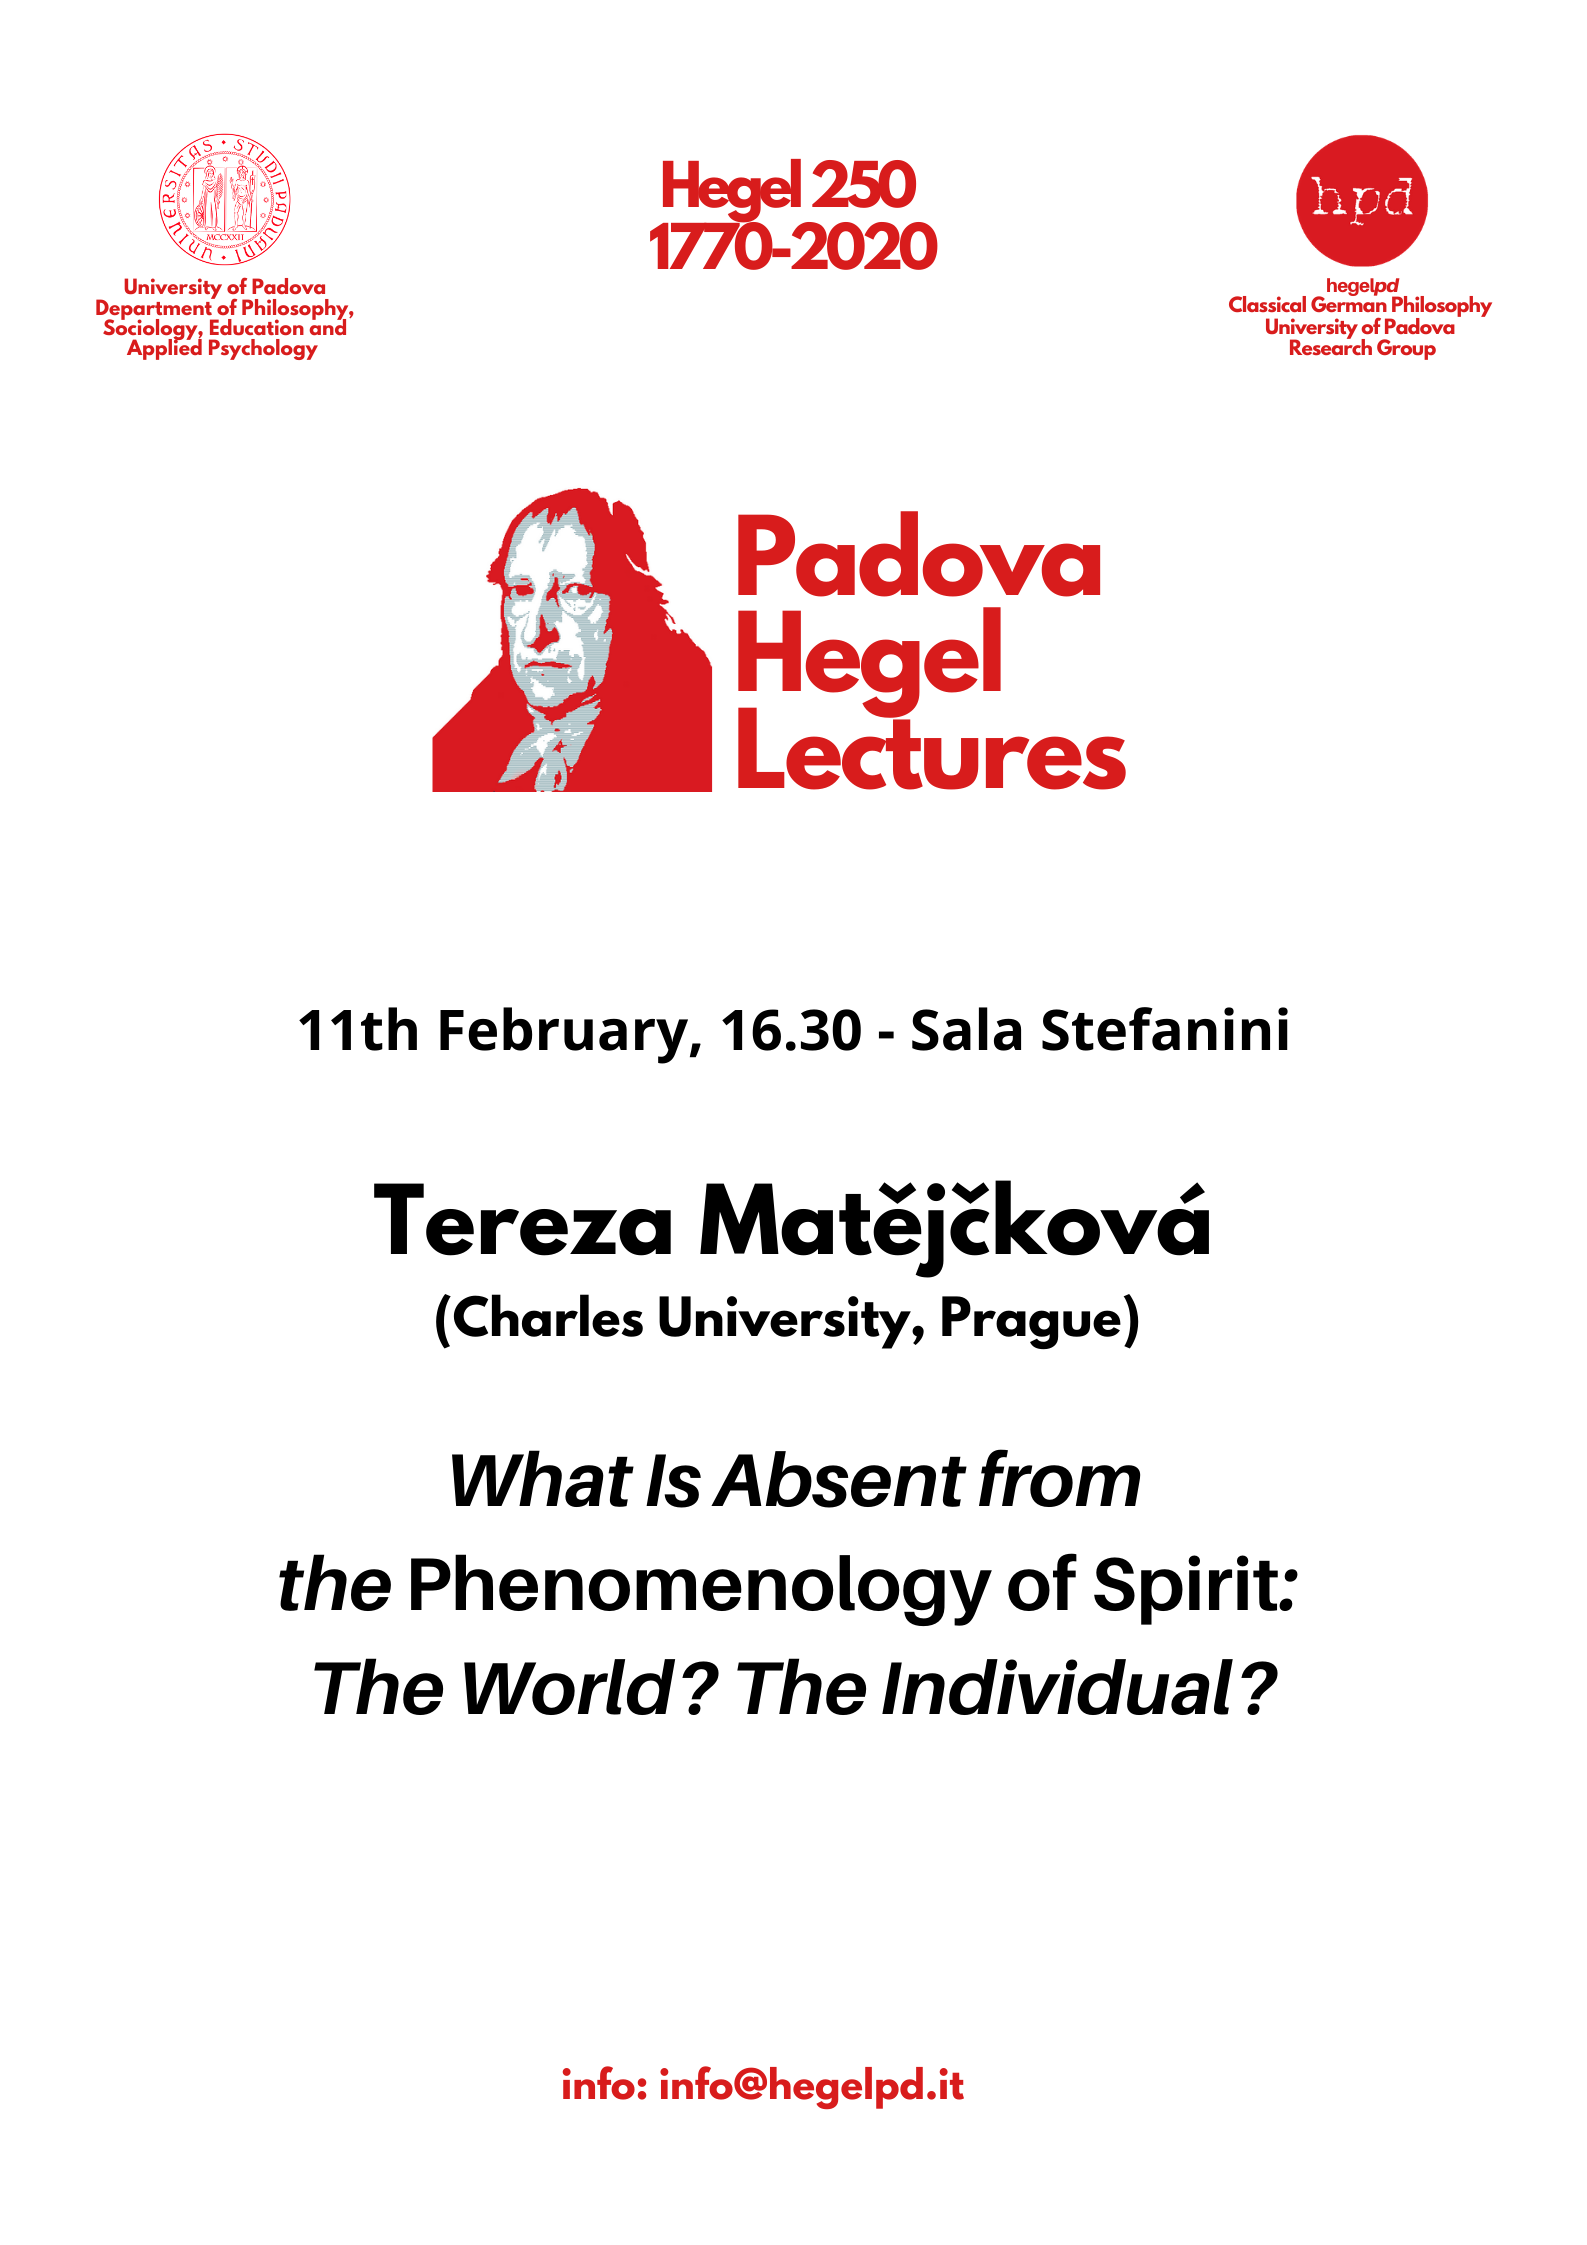 HPD – Padova Hegel Lectures 2020: Tereza Matějčková (Charles University, Prague): “What Is Absent from the Phenomenology of Spirit: The World? The Individual?” (Padova, February 11th 2020)